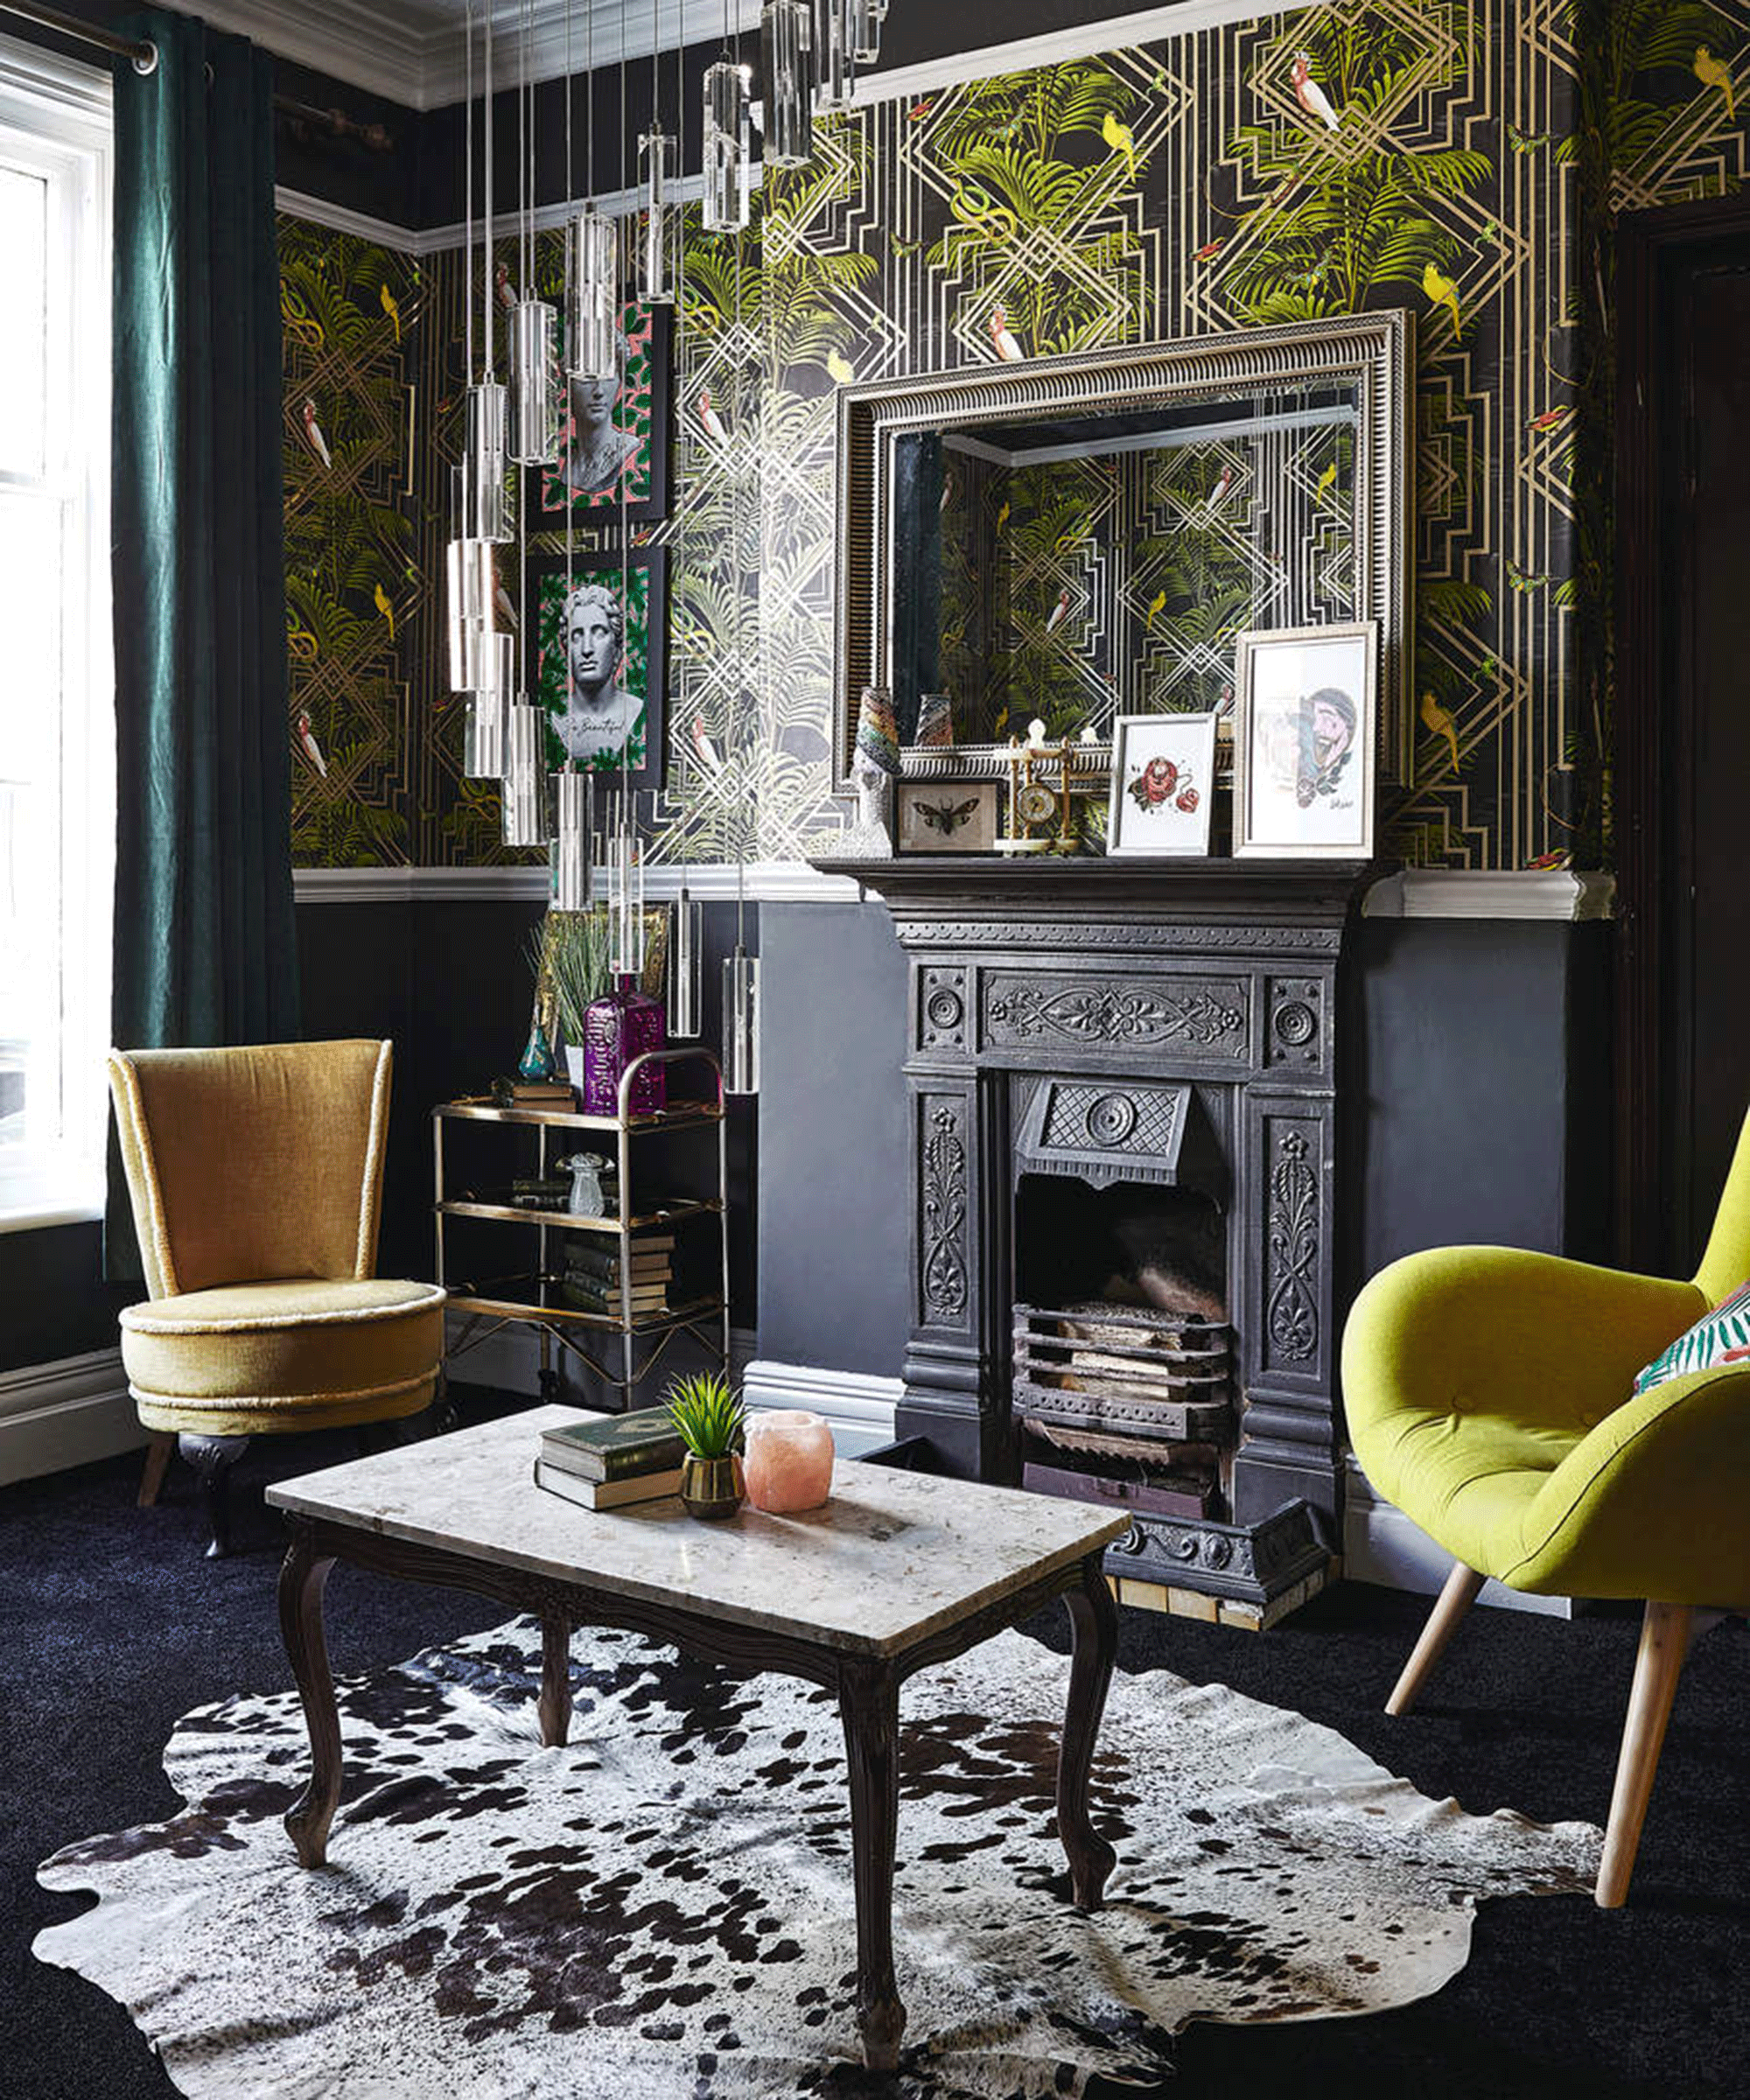 A dark, Art-Deco inspired living room with fireplace and yellow accent chair decor